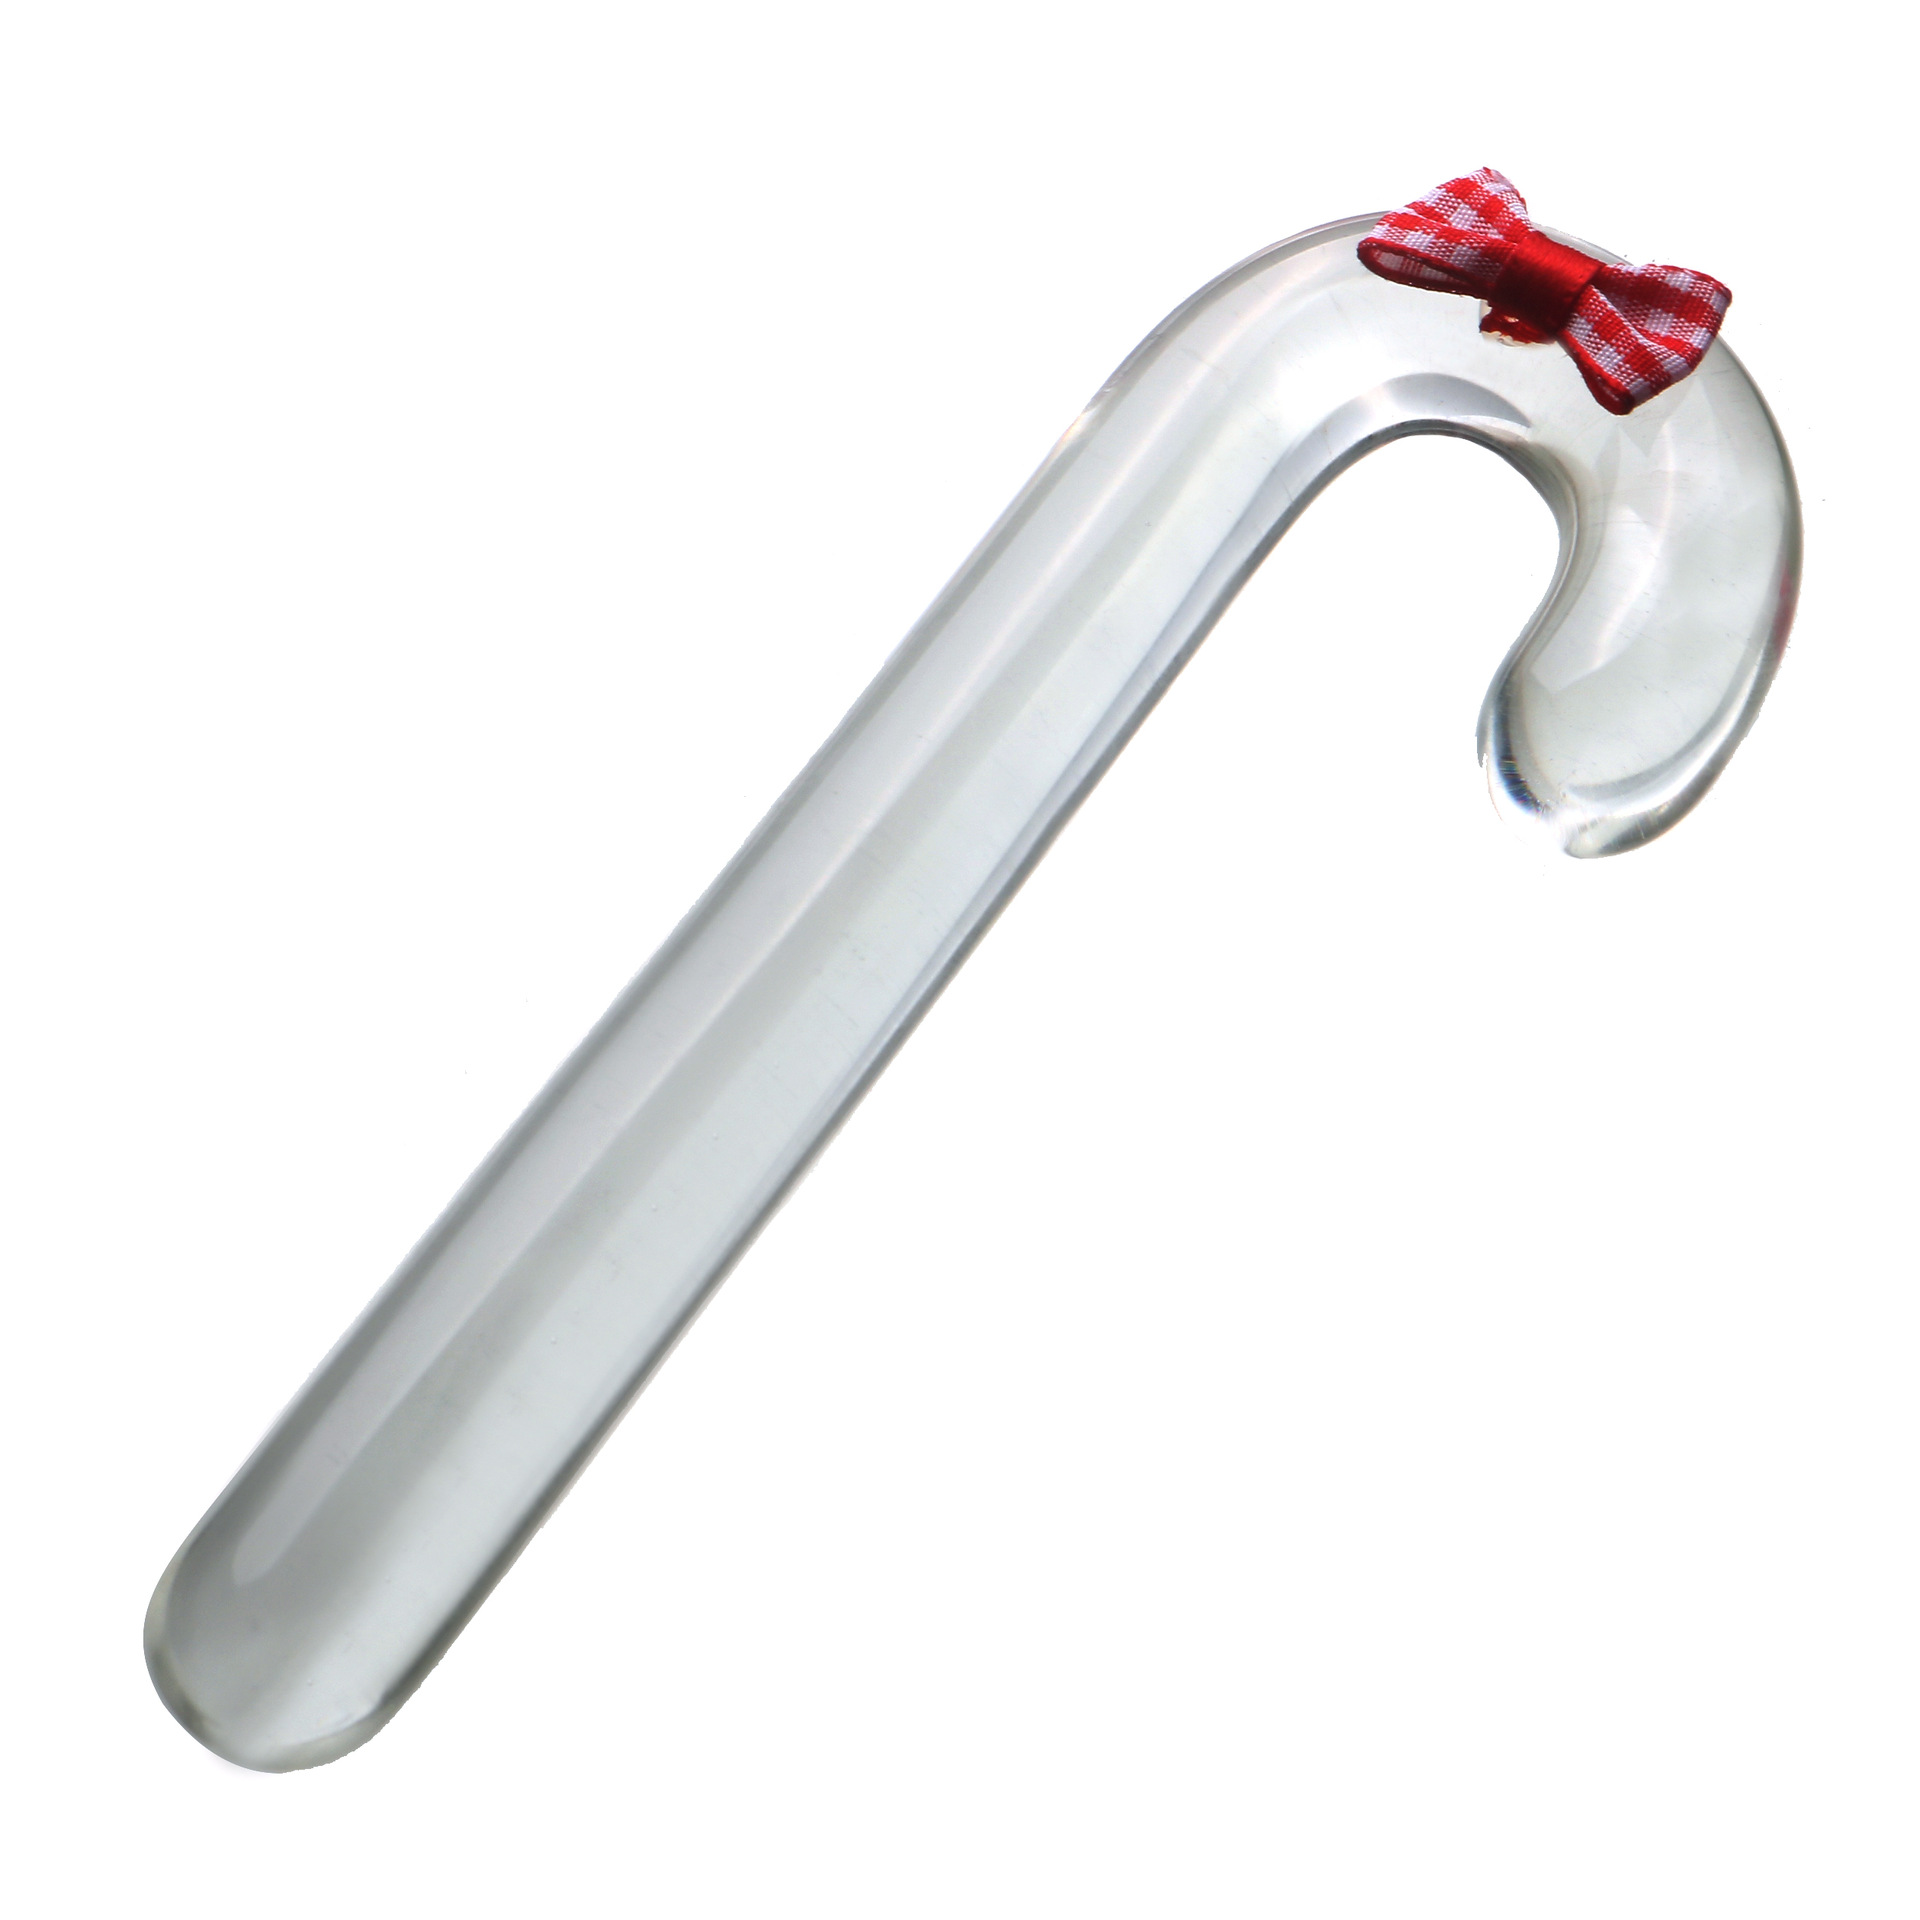 Cute Mini Christmas Crutches Transparent Glass Penis Butt Plug Women's Magic Wand Sex Toys Factory Delivery